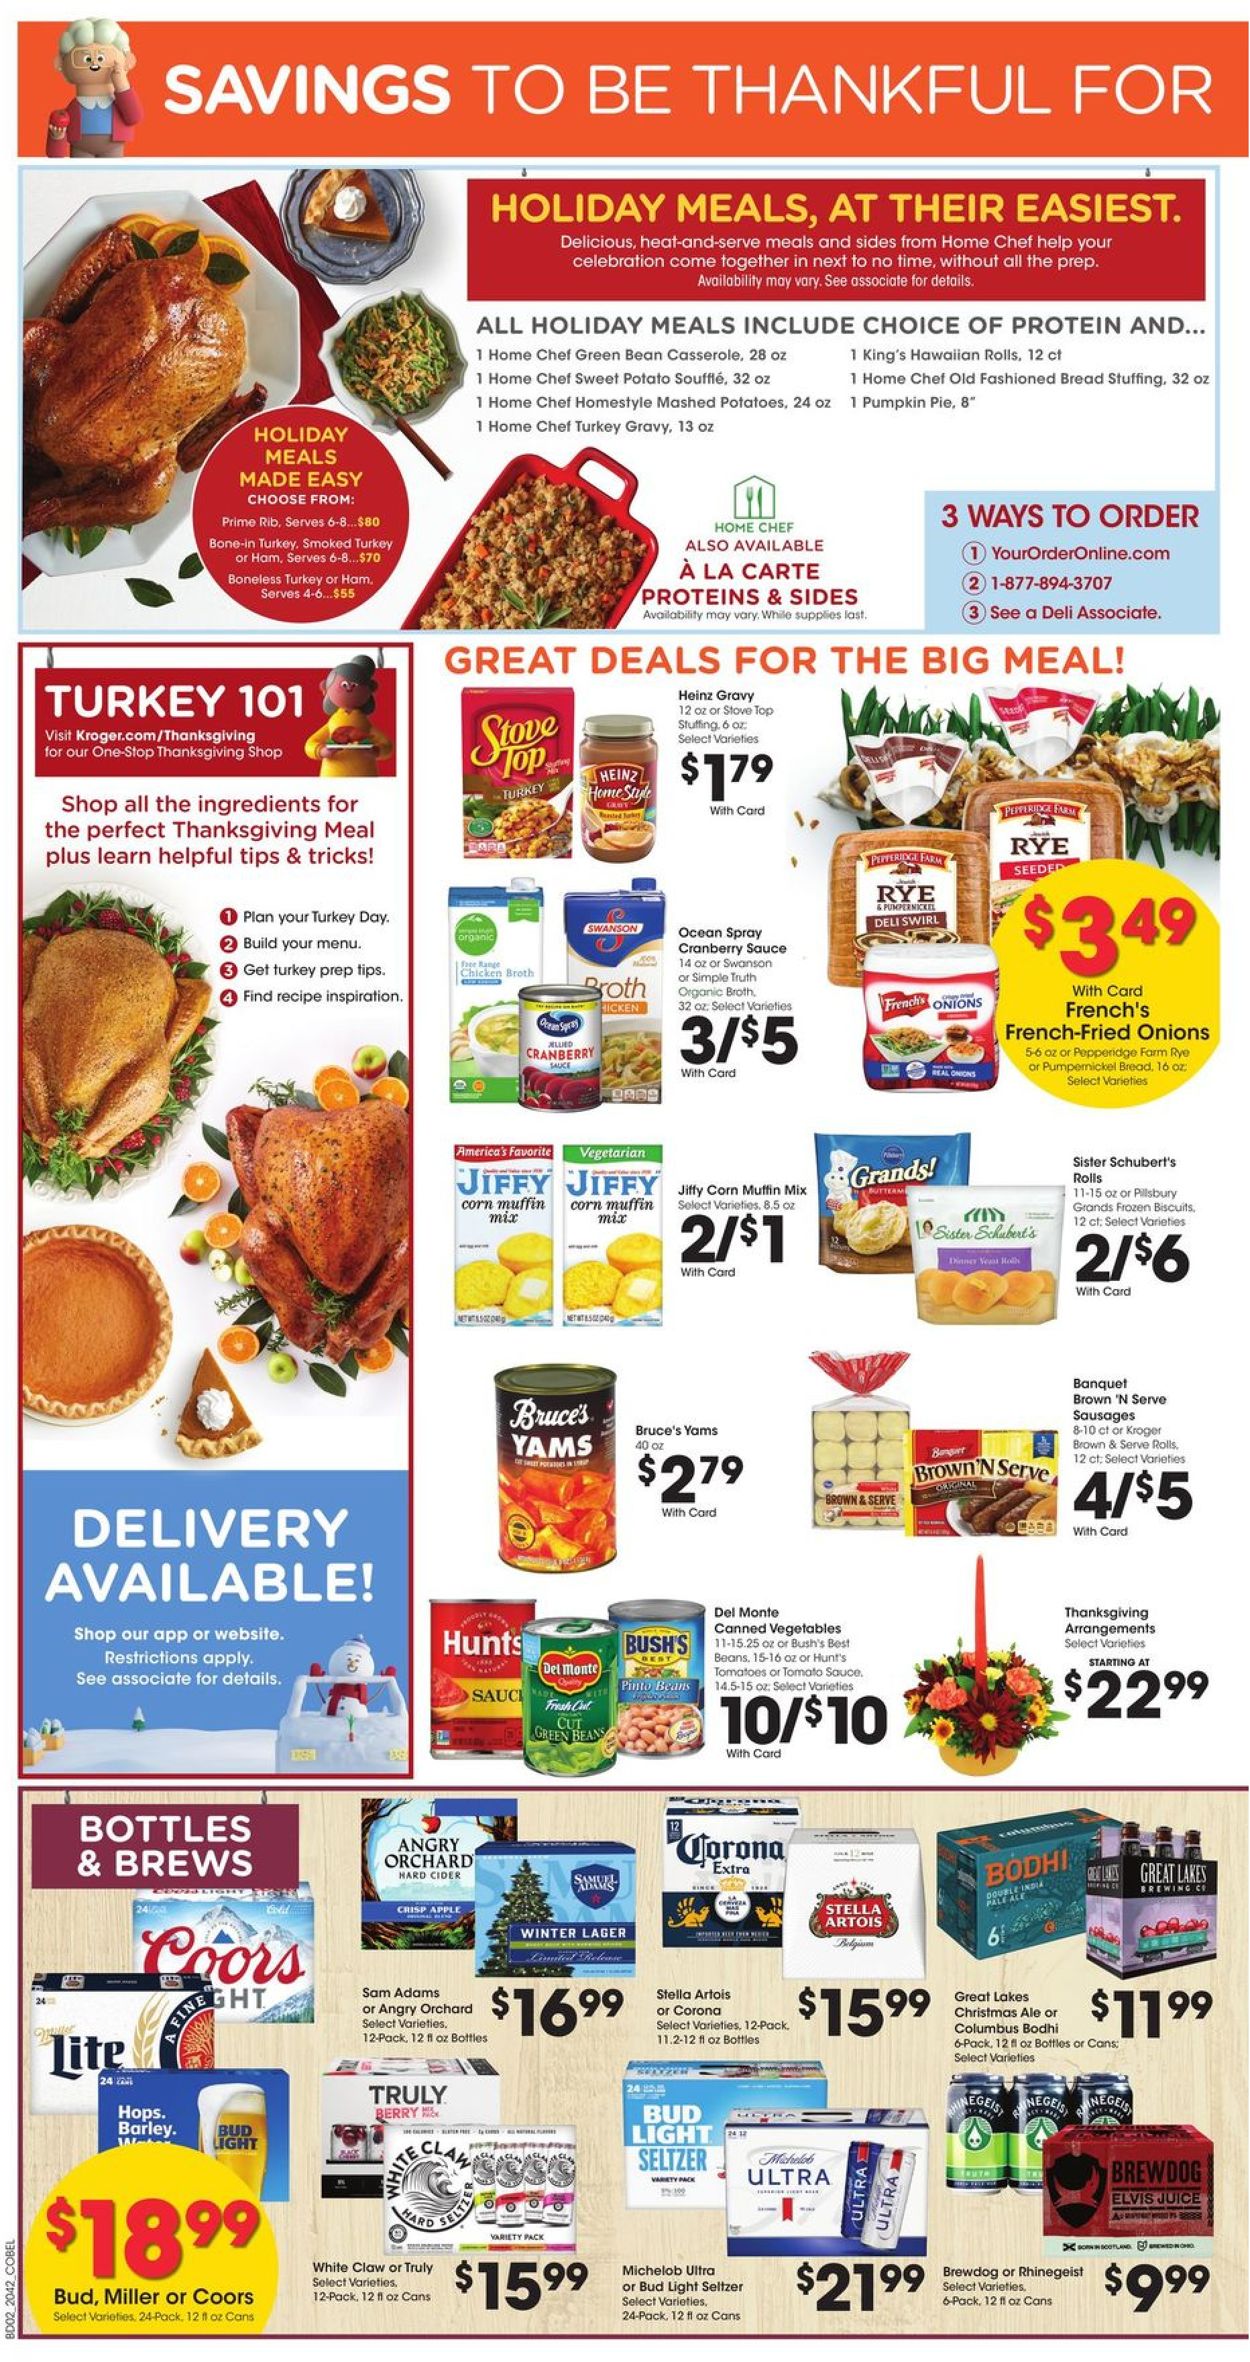 Kroger Thanksgiving ad 2020 Current weekly ad 11/18 - 11/26/2020 2 - frequent-ads.com